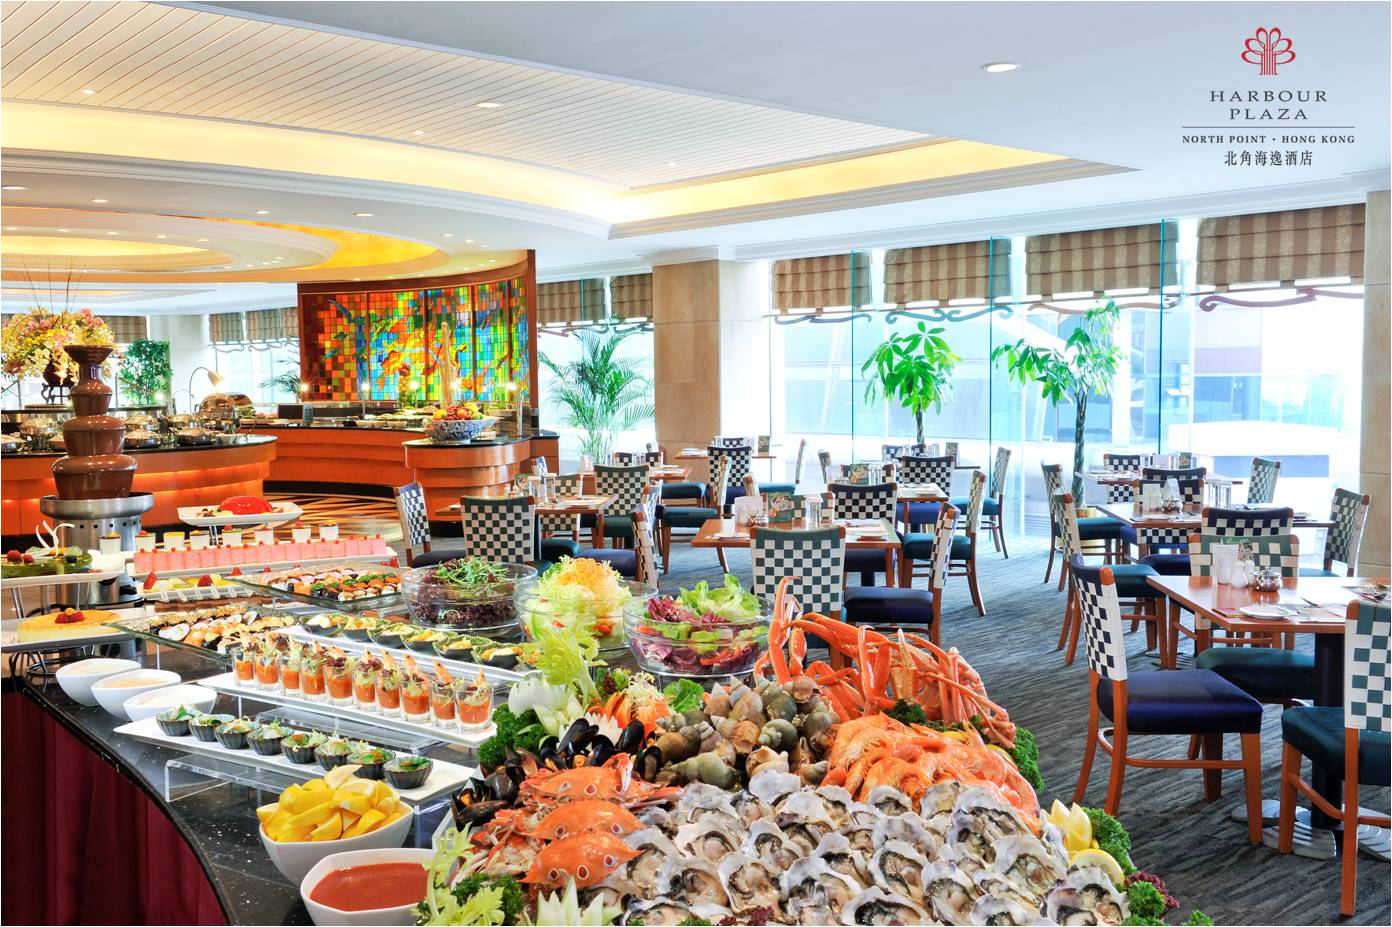 Chef team is showcasing their refined approach and boundless creativity, created a selection of seafood buffet delicacy. Purchase at hotel eShop to enjoy up to 25% off discount.
